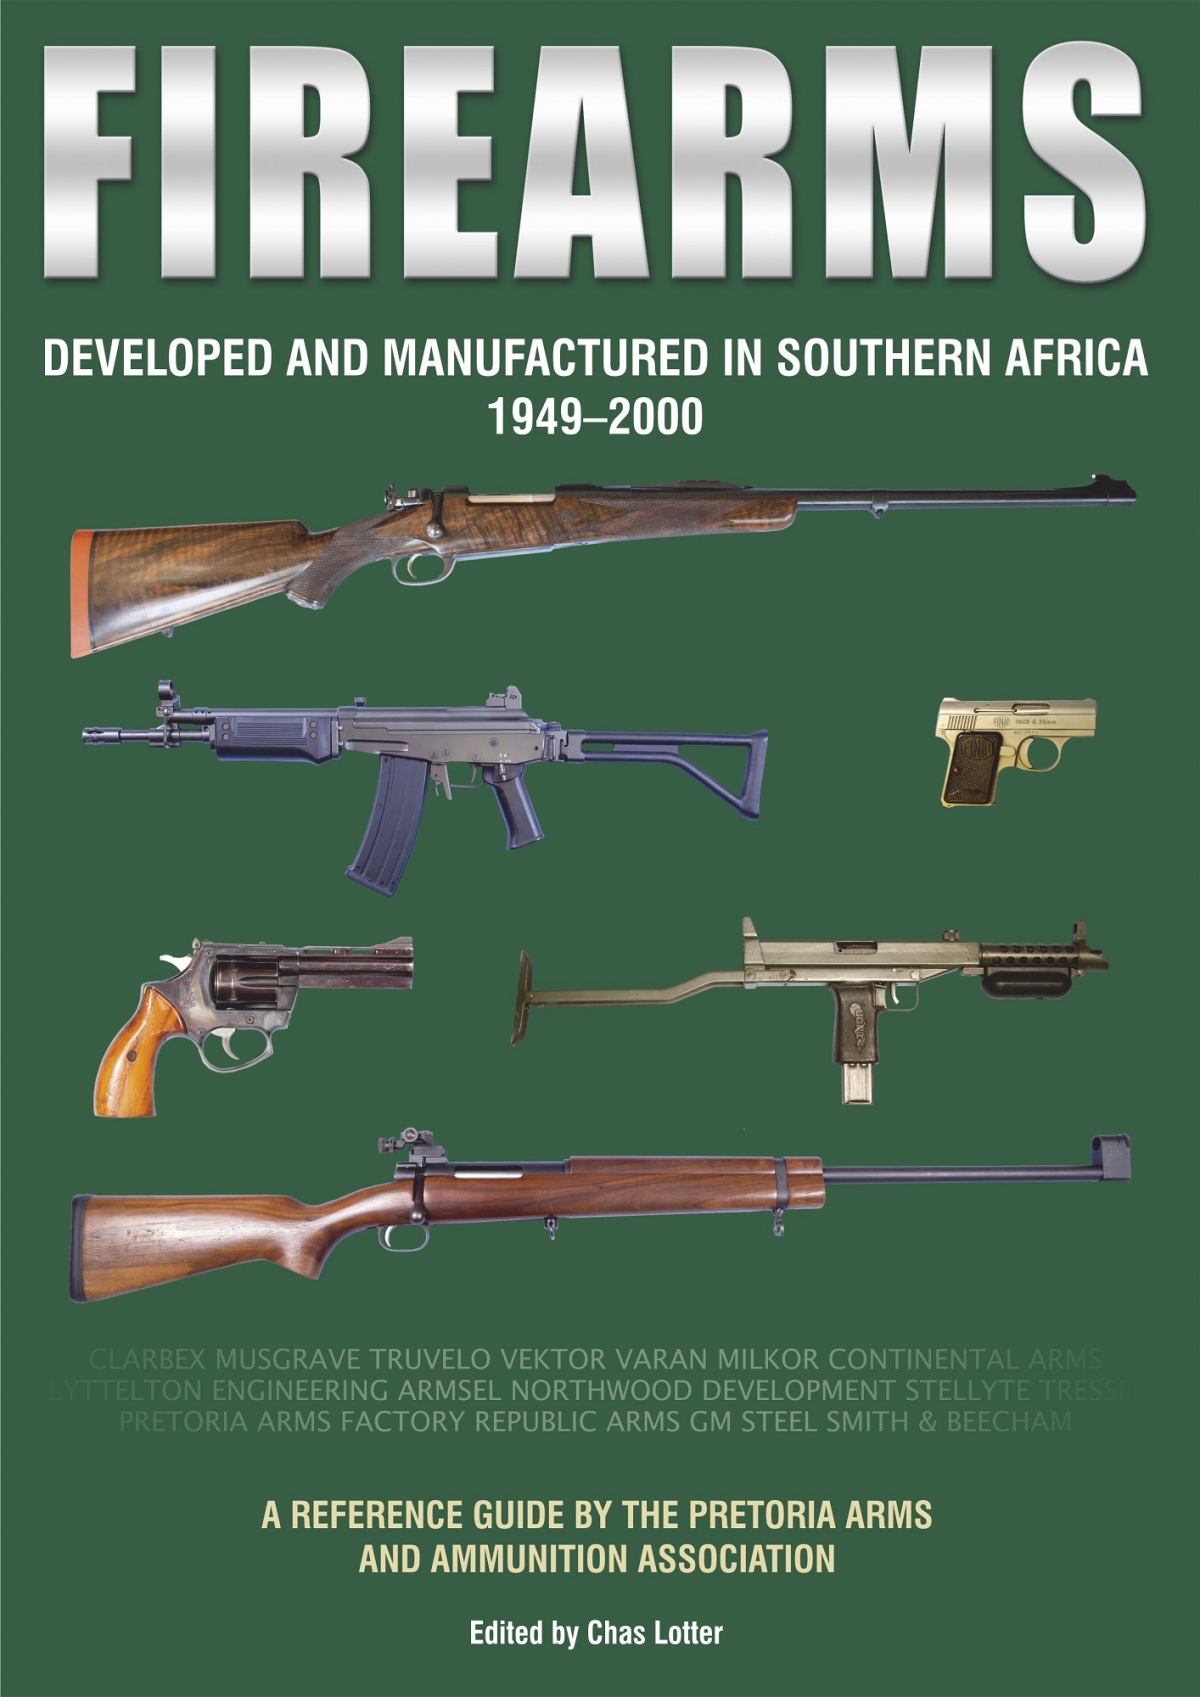 This book is definitely a must-have for the discerning gun enthusiast and expert, for gun collectors, and historians!